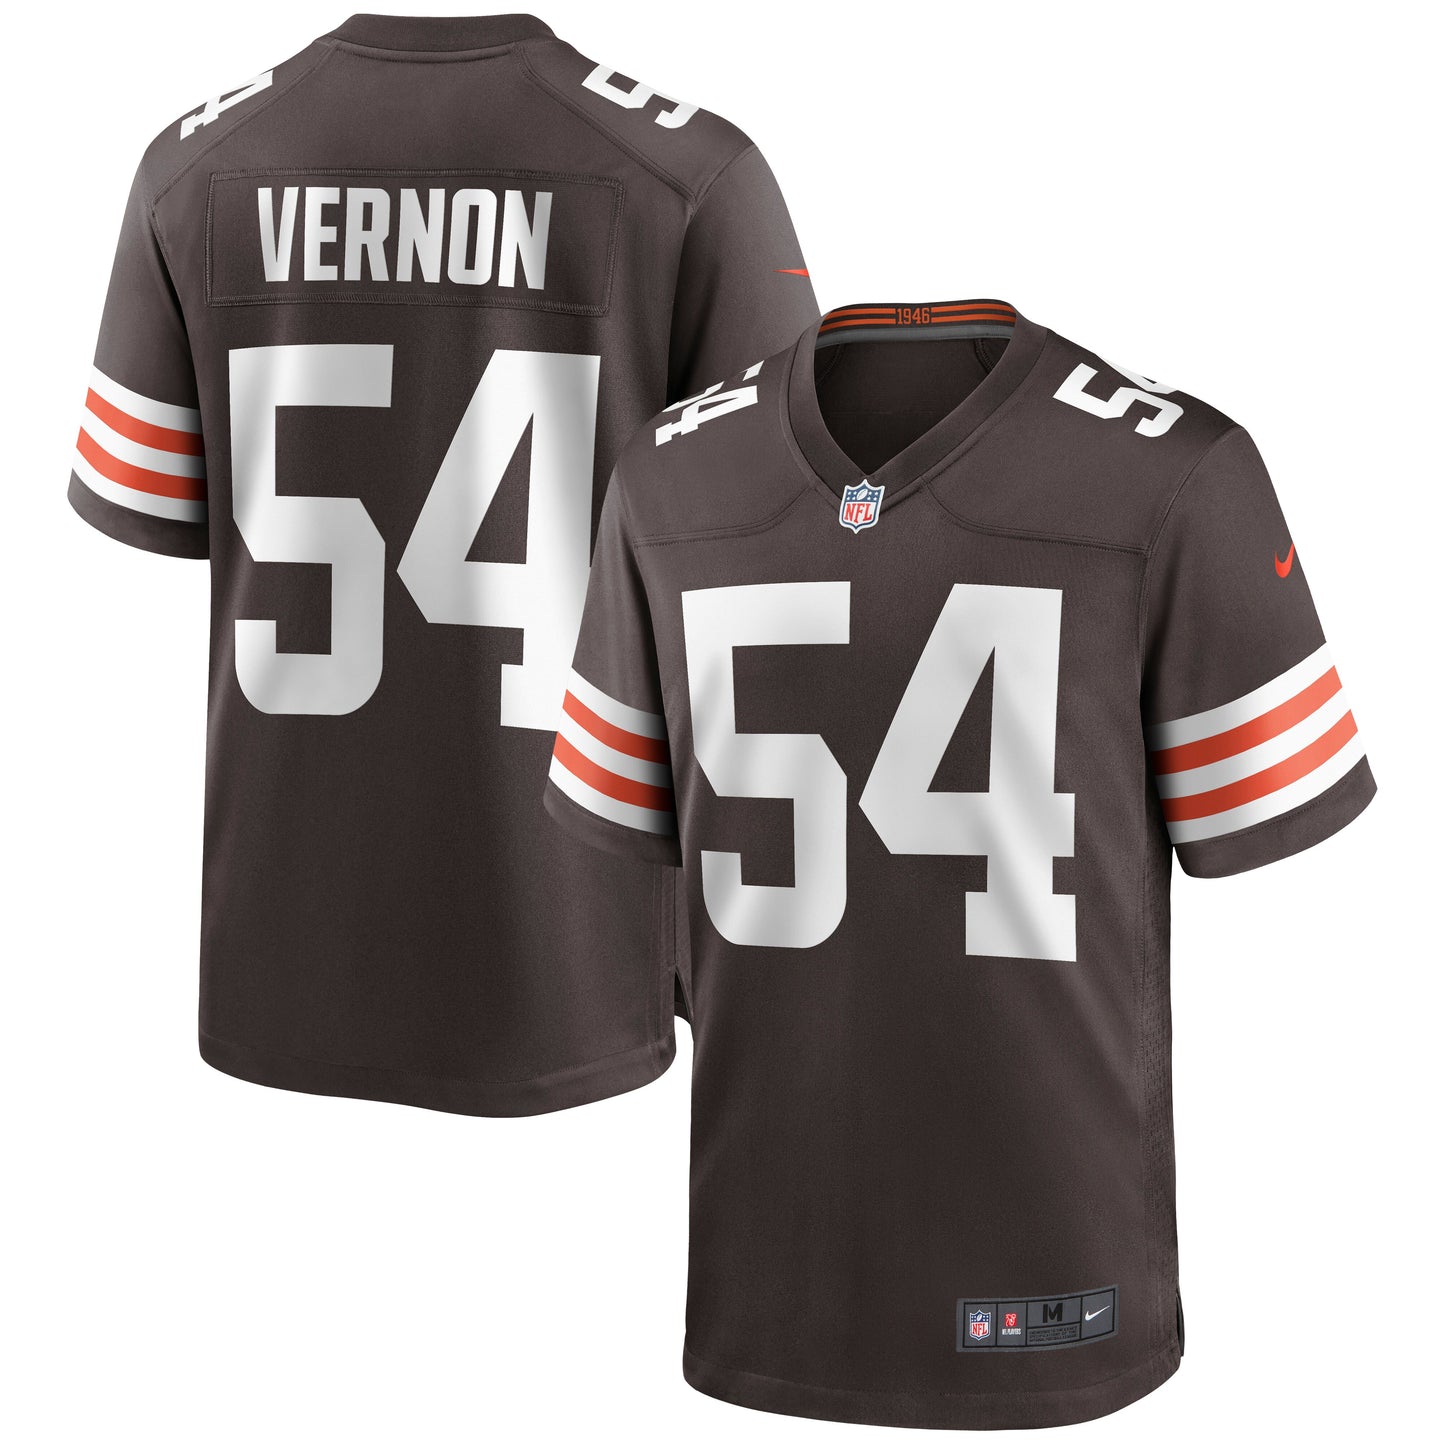 Olivier Vernon Cleveland Browns Nike Game Jersey - Brown